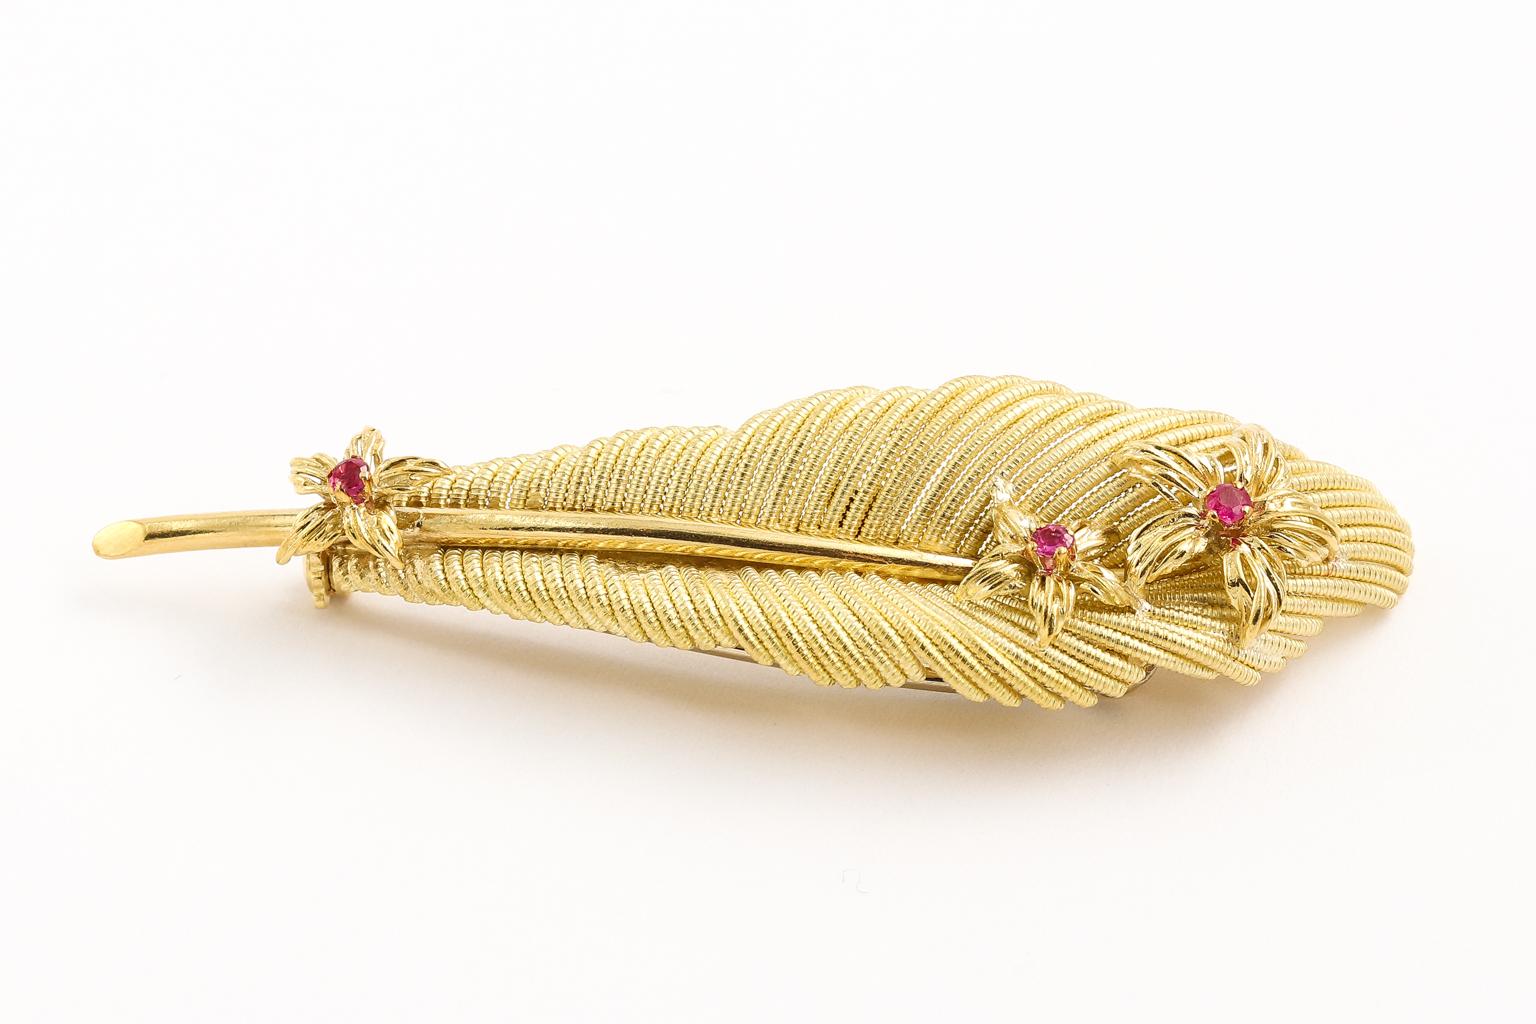 Vintage pin made by Tiffany & Co. It is the classic feather style. The pin is 15 grams although it has the airy feather look. 2 5/8 inches long with three rubies in the center of azaleas. Marked Tiffany & Co., 18 Kt, Italy on the back. The box and